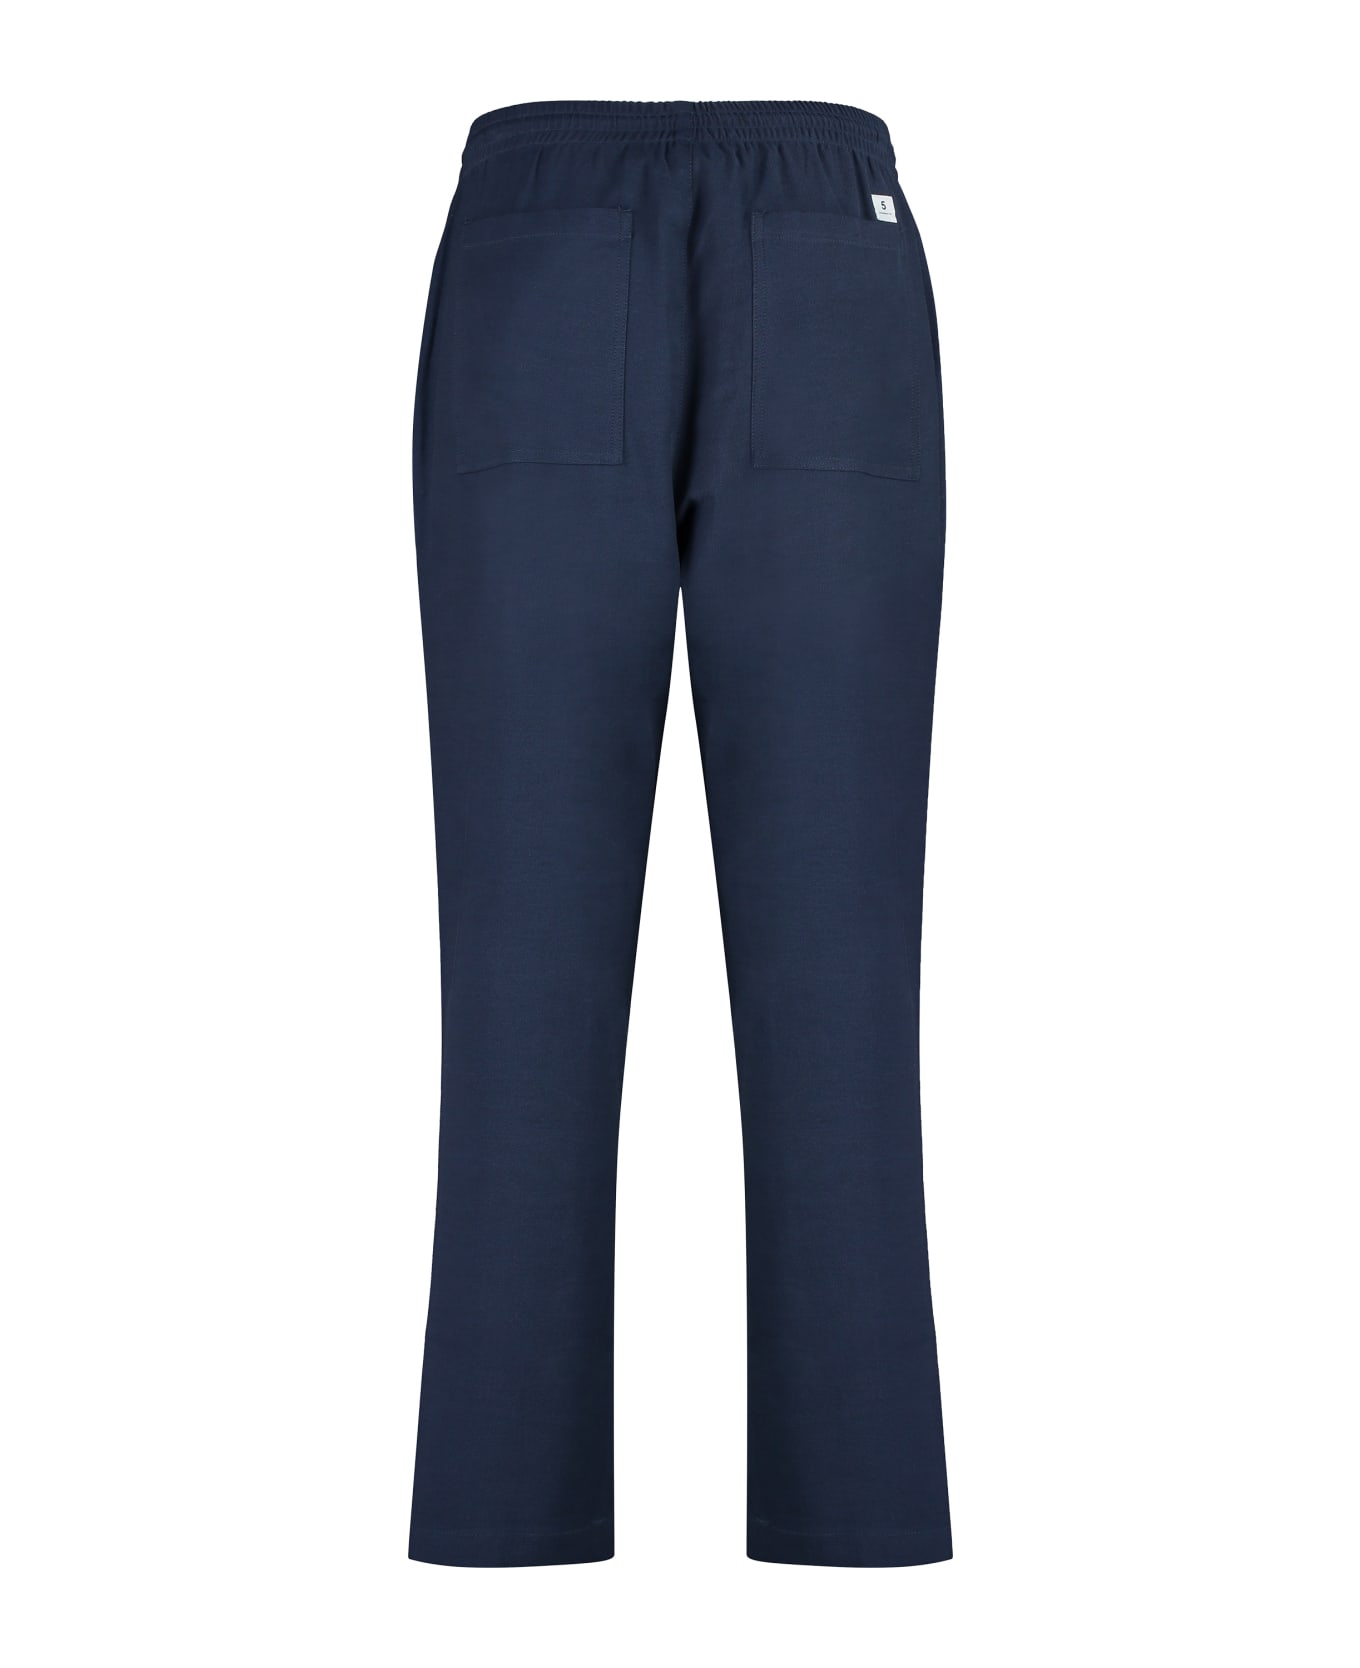 Department Five Brewery Cotton Blend Trousers - blue